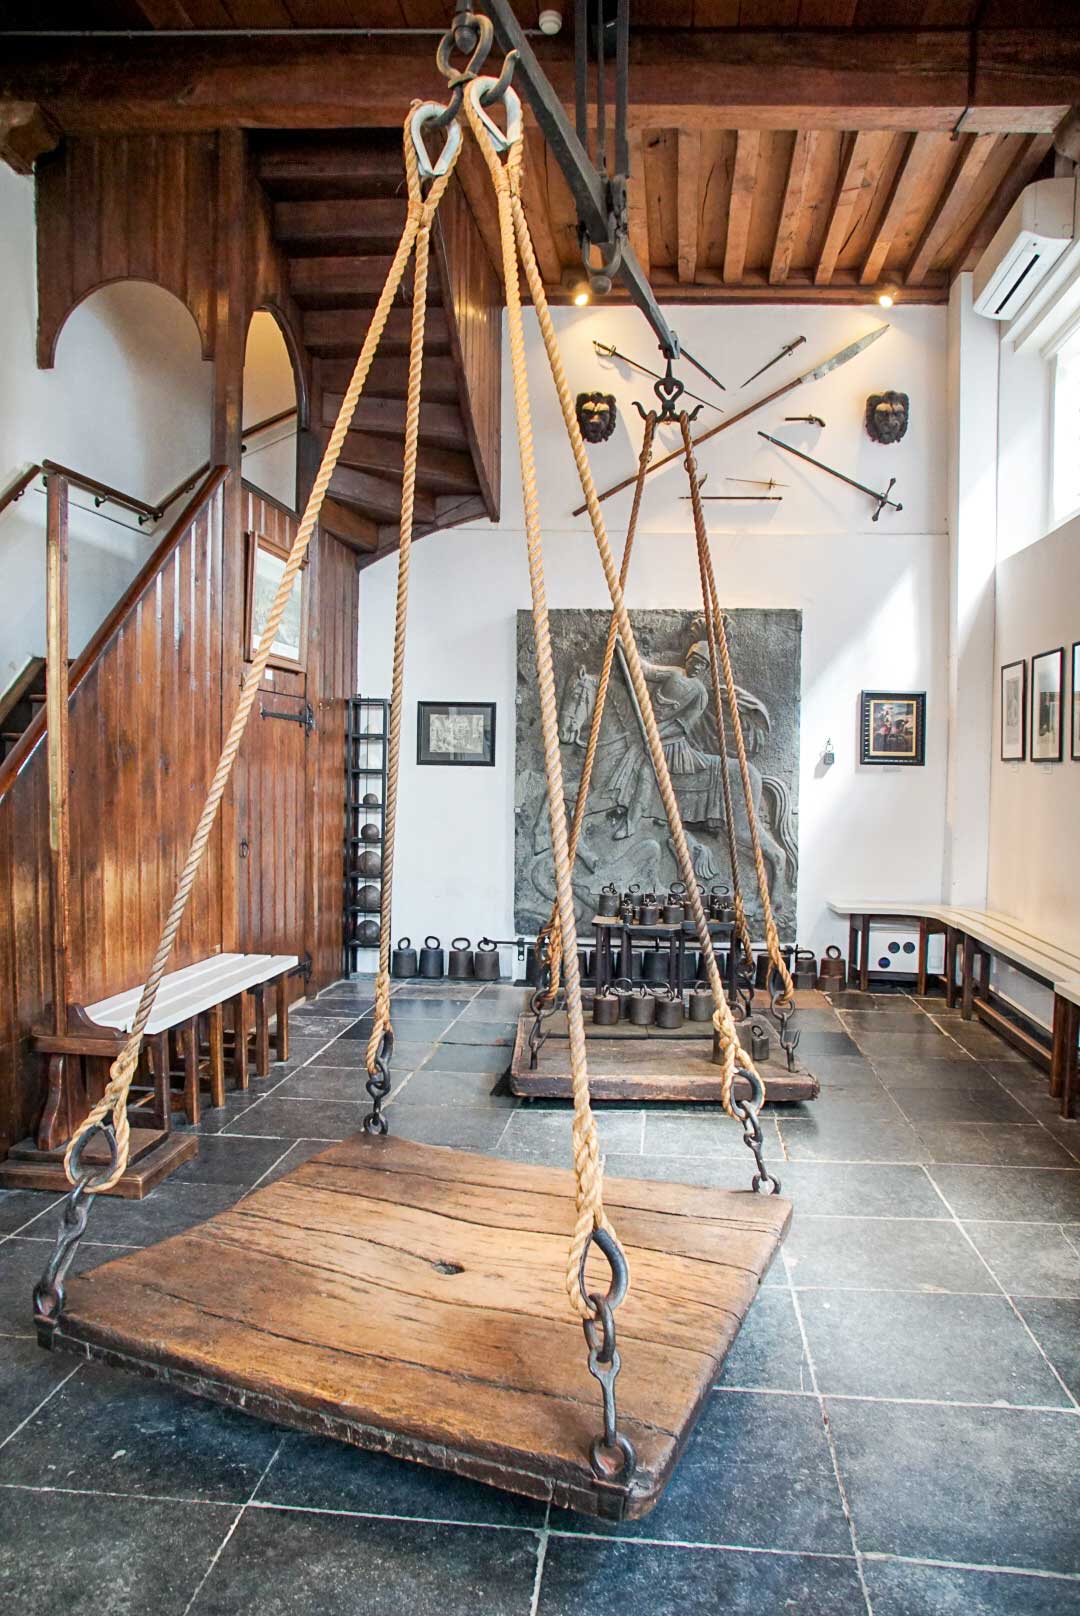 The witch weighing scale (heksenwaag, 1545) in Oudenwater, The Netherlands. If you were accused of witchcraft, you could go here, and be weighed, and get your name cleared.jpg